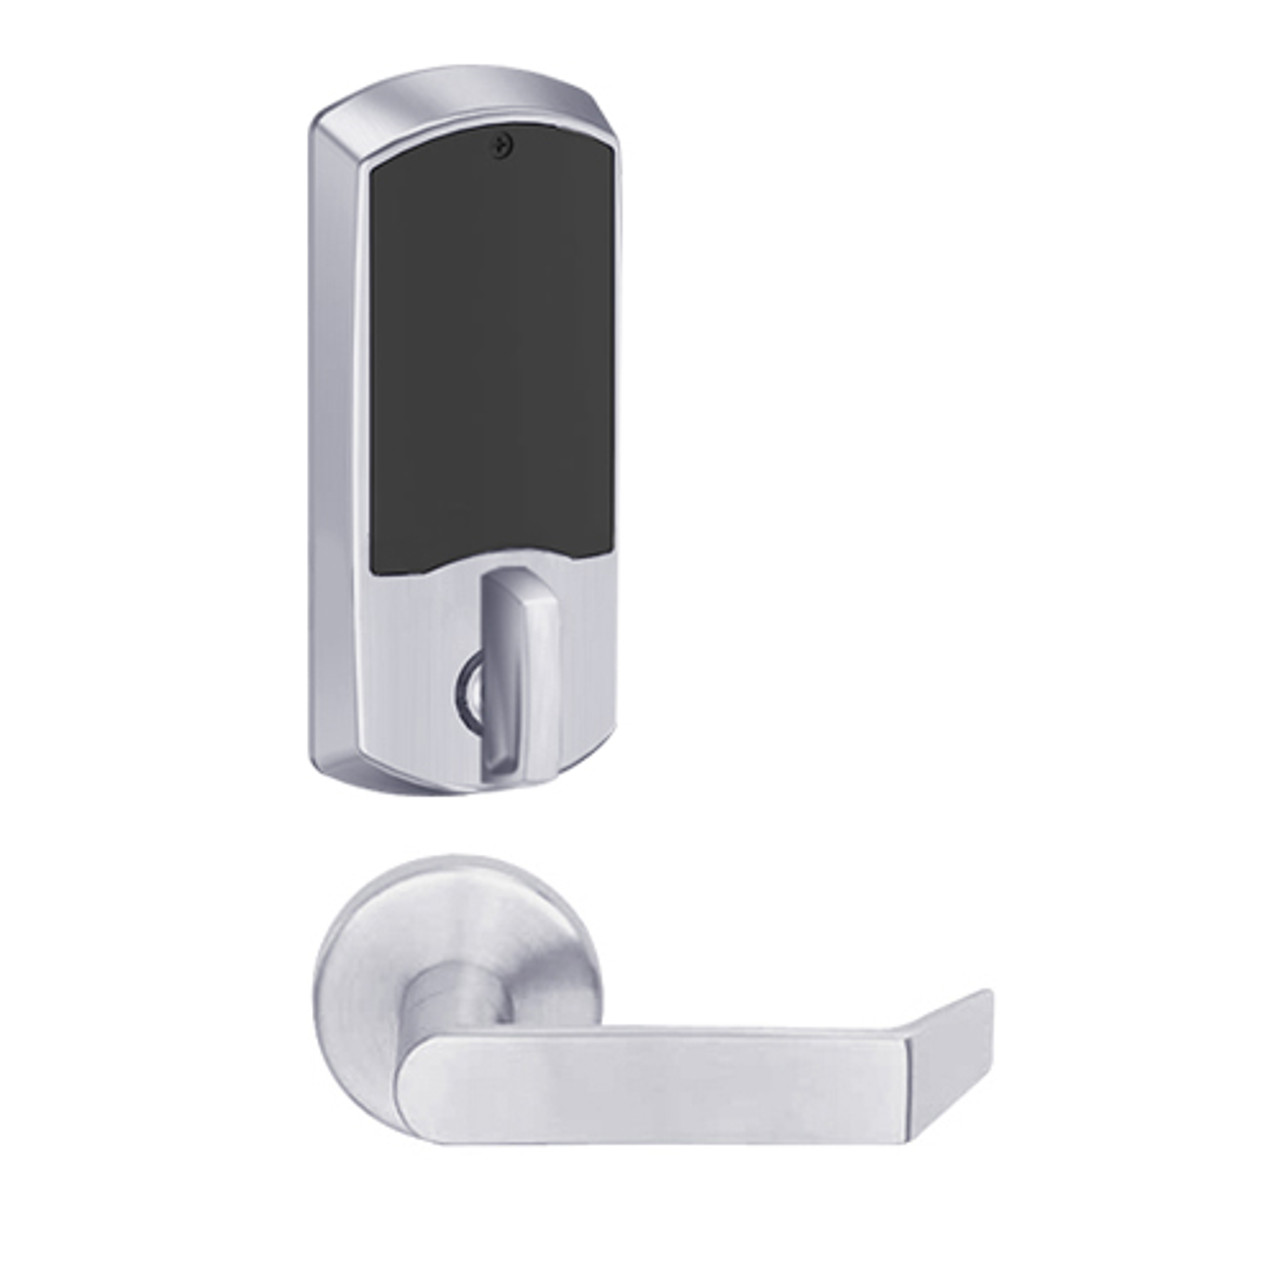 LEMD-GRW-P-06-626-00B Schlage Privacy/Apartment Wireless Greenwich Mortise Deadbolt Lock with LED and Rhodes Lever in Satin Chrome